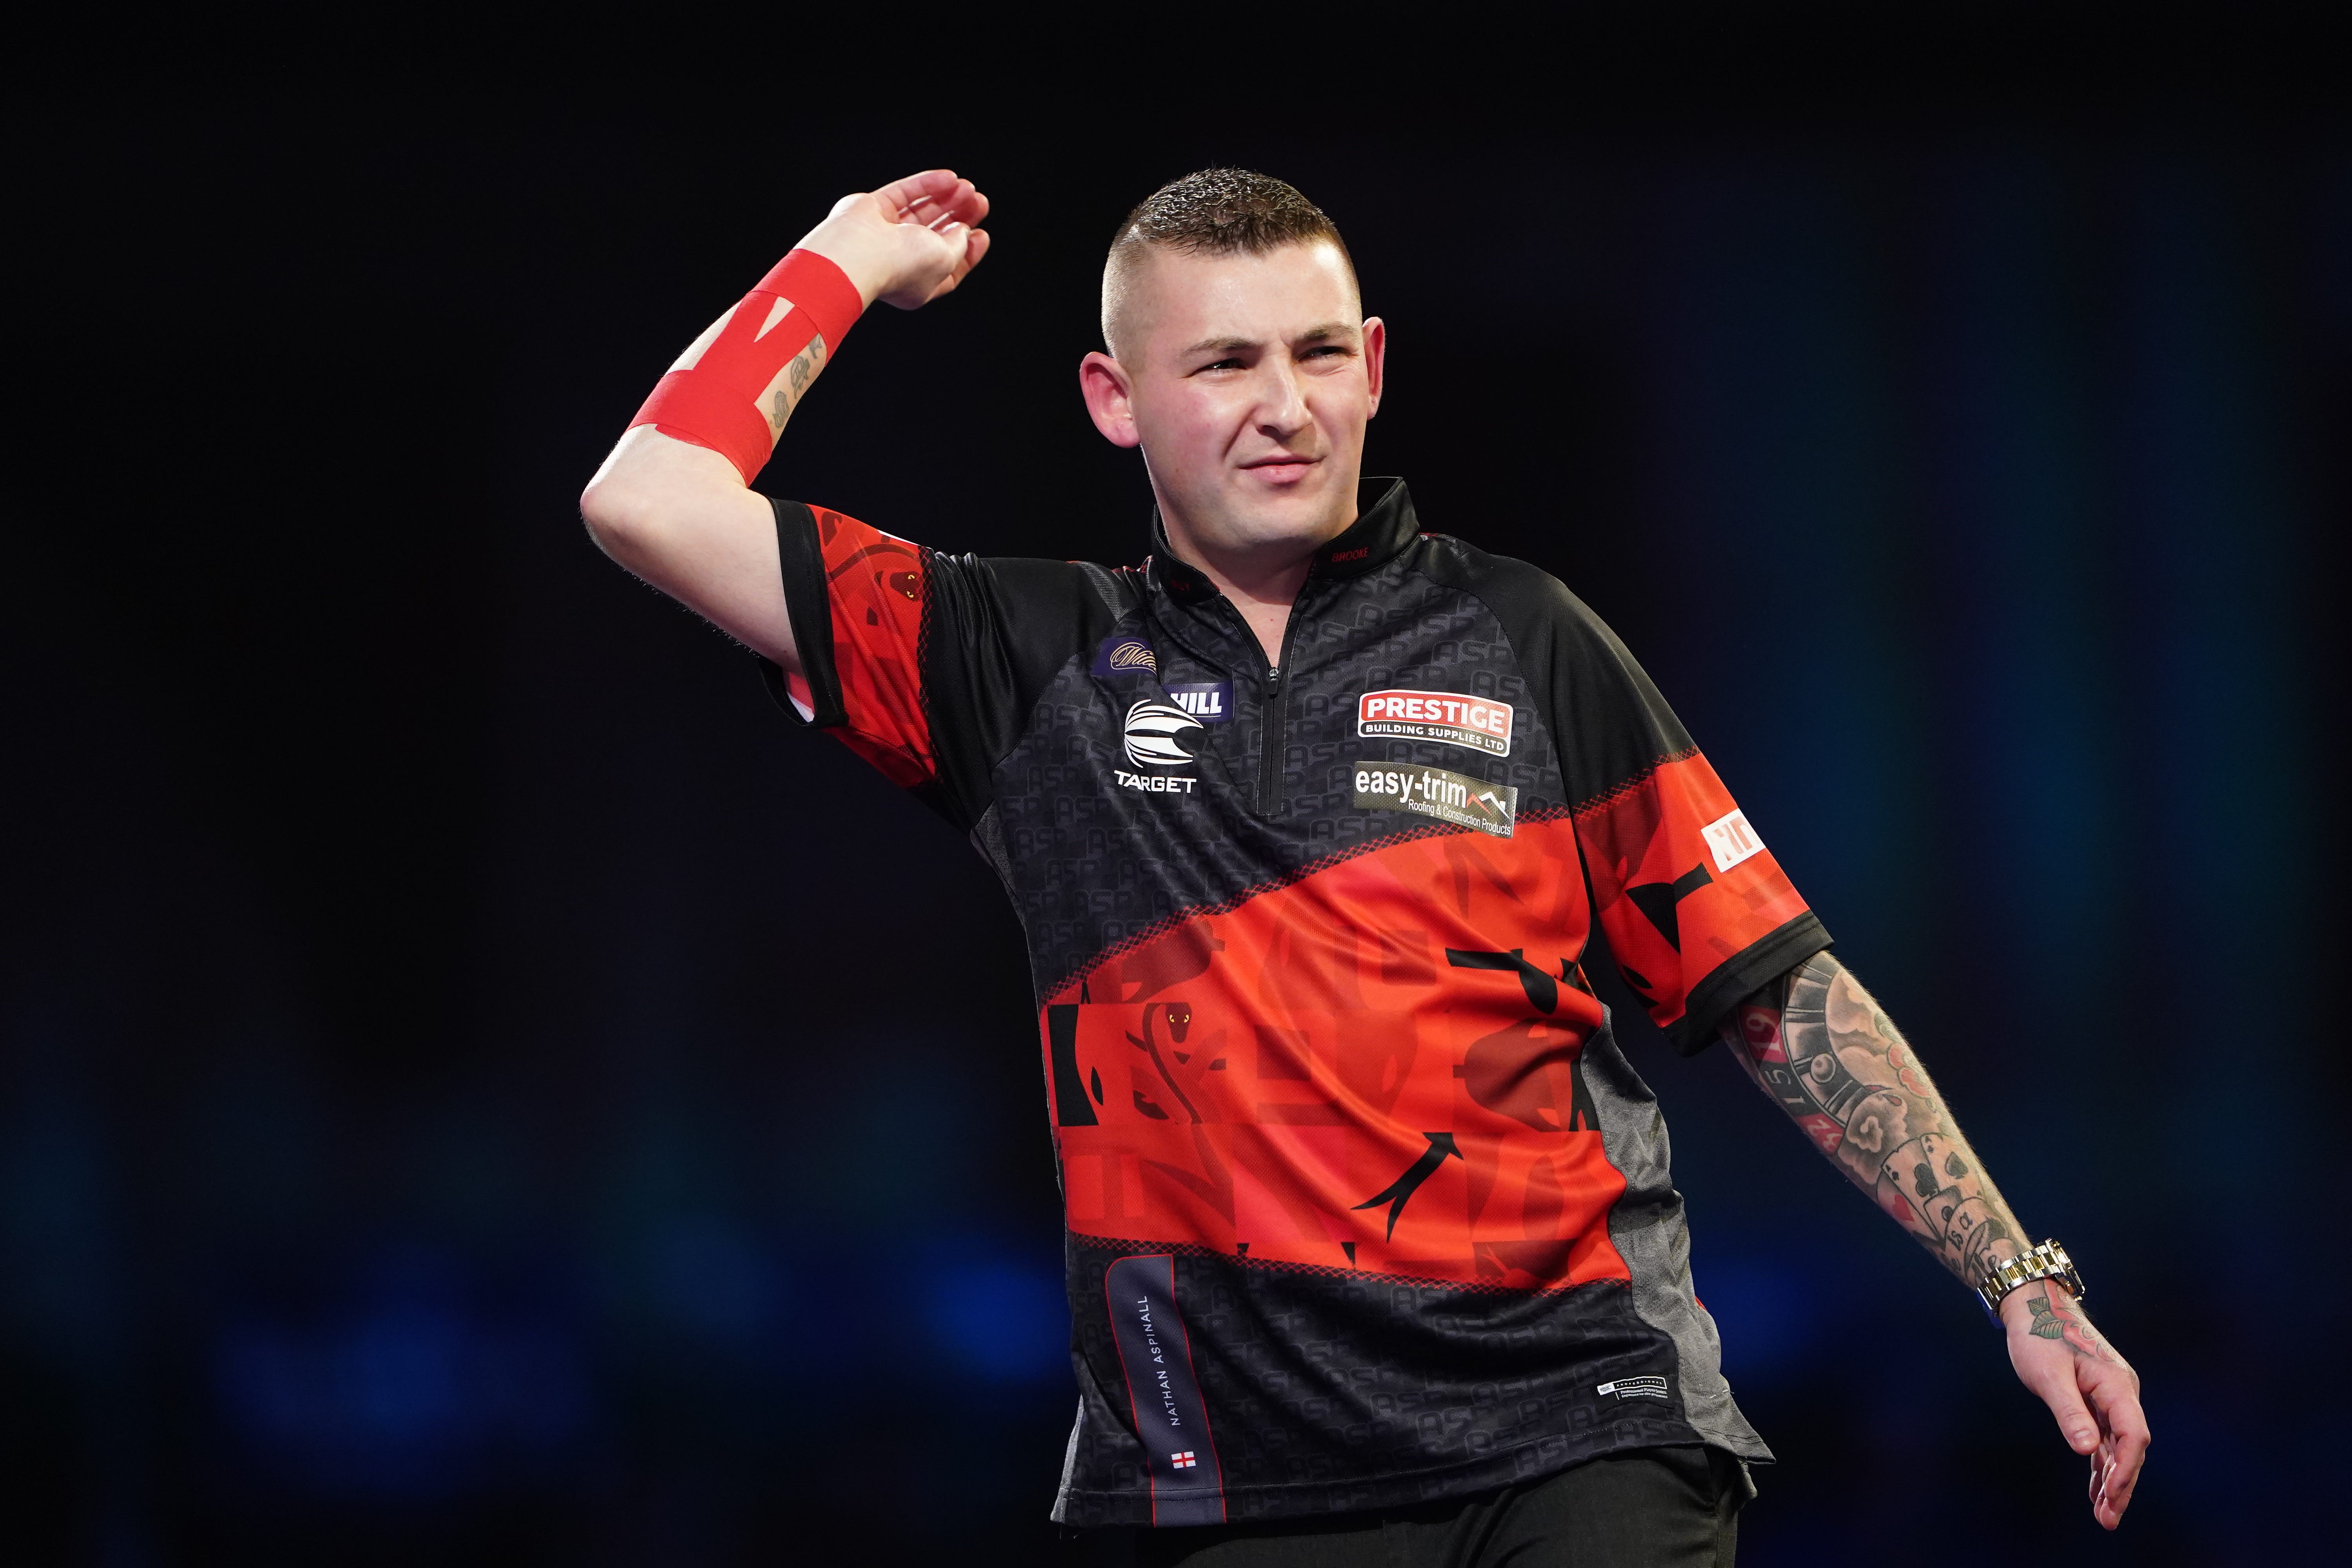 Nathan Aspinall will play in his first World Grand Prix final after beating world number one Gerwyn Price in the final four (Zac Goodwin/PA)